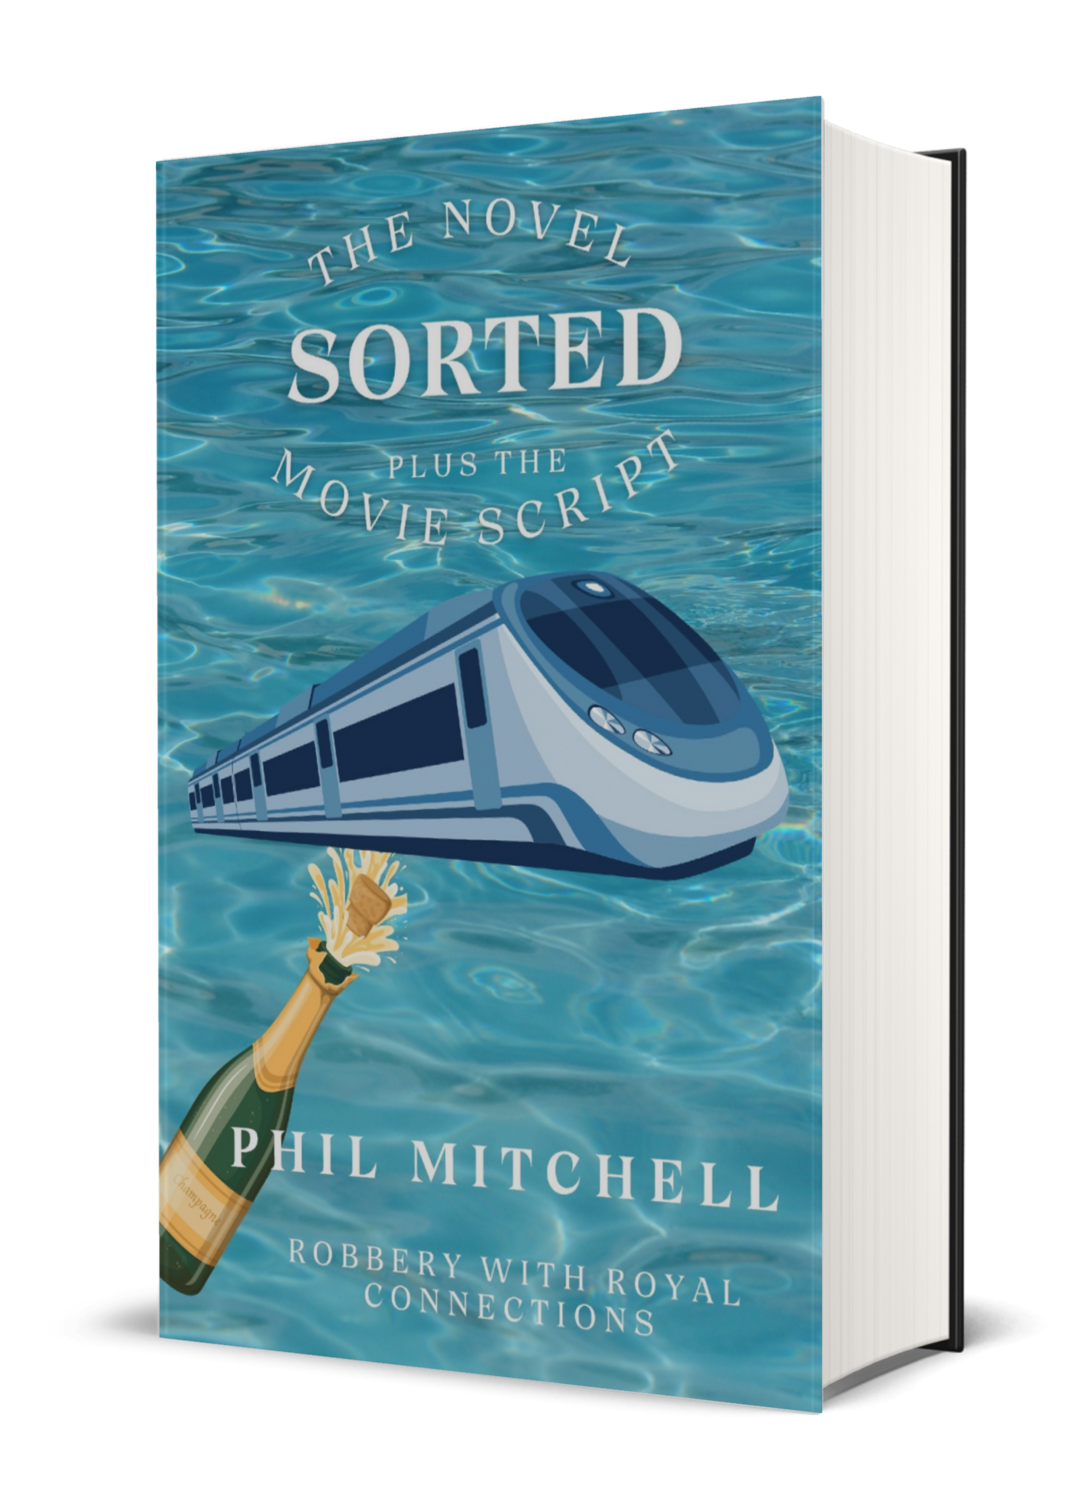 eBook: "SORTED: The Novel and The Movie Script"